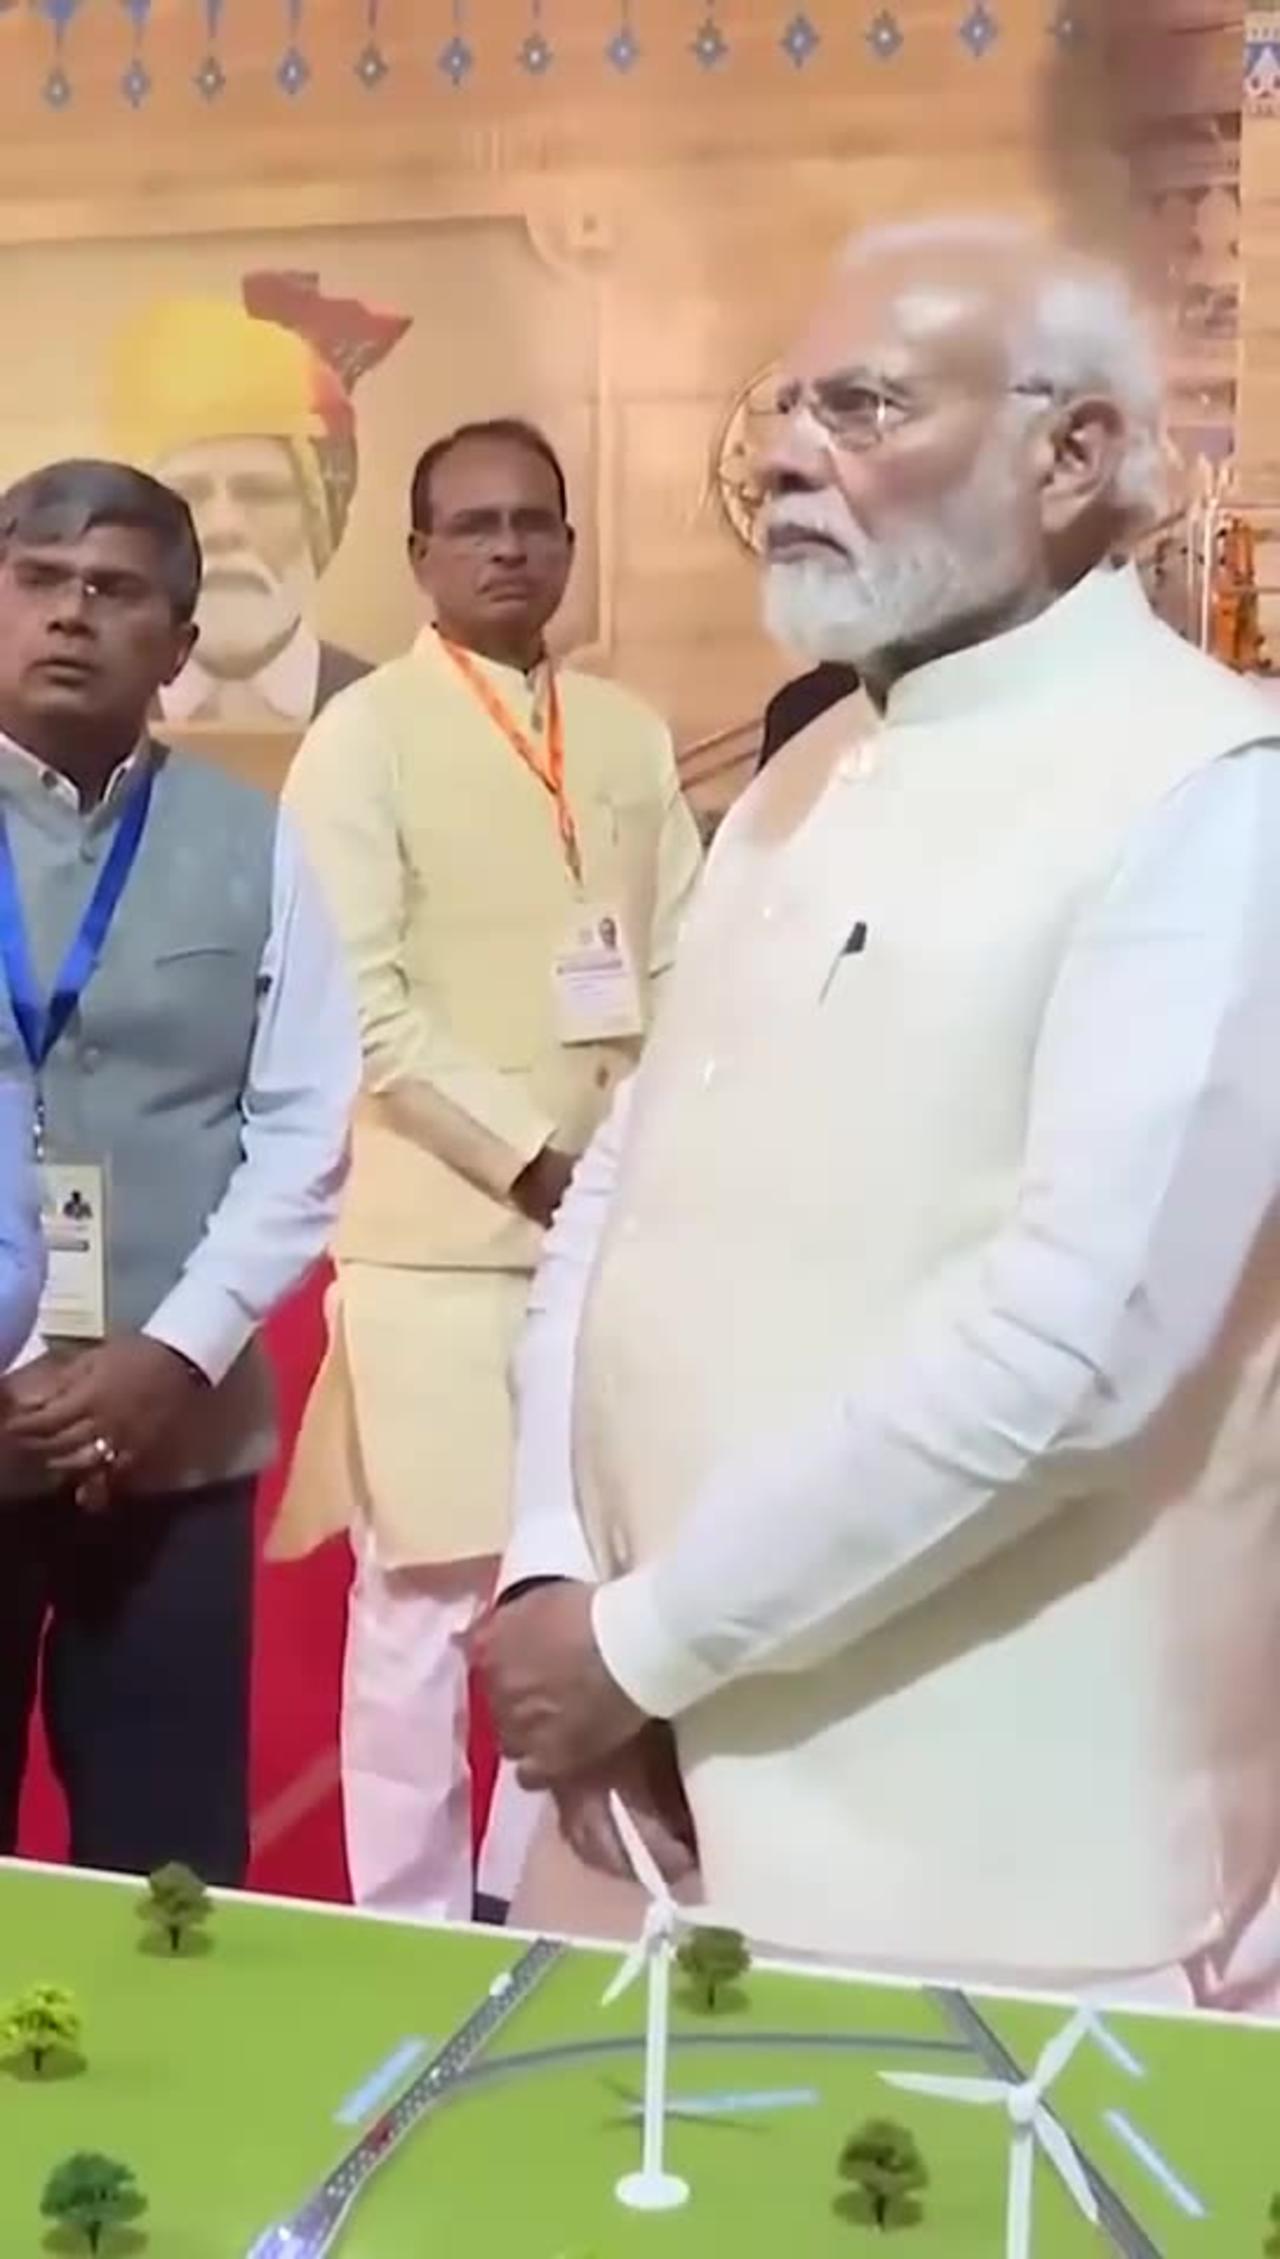 PM Modi inspects an Exhibition in Gwalior